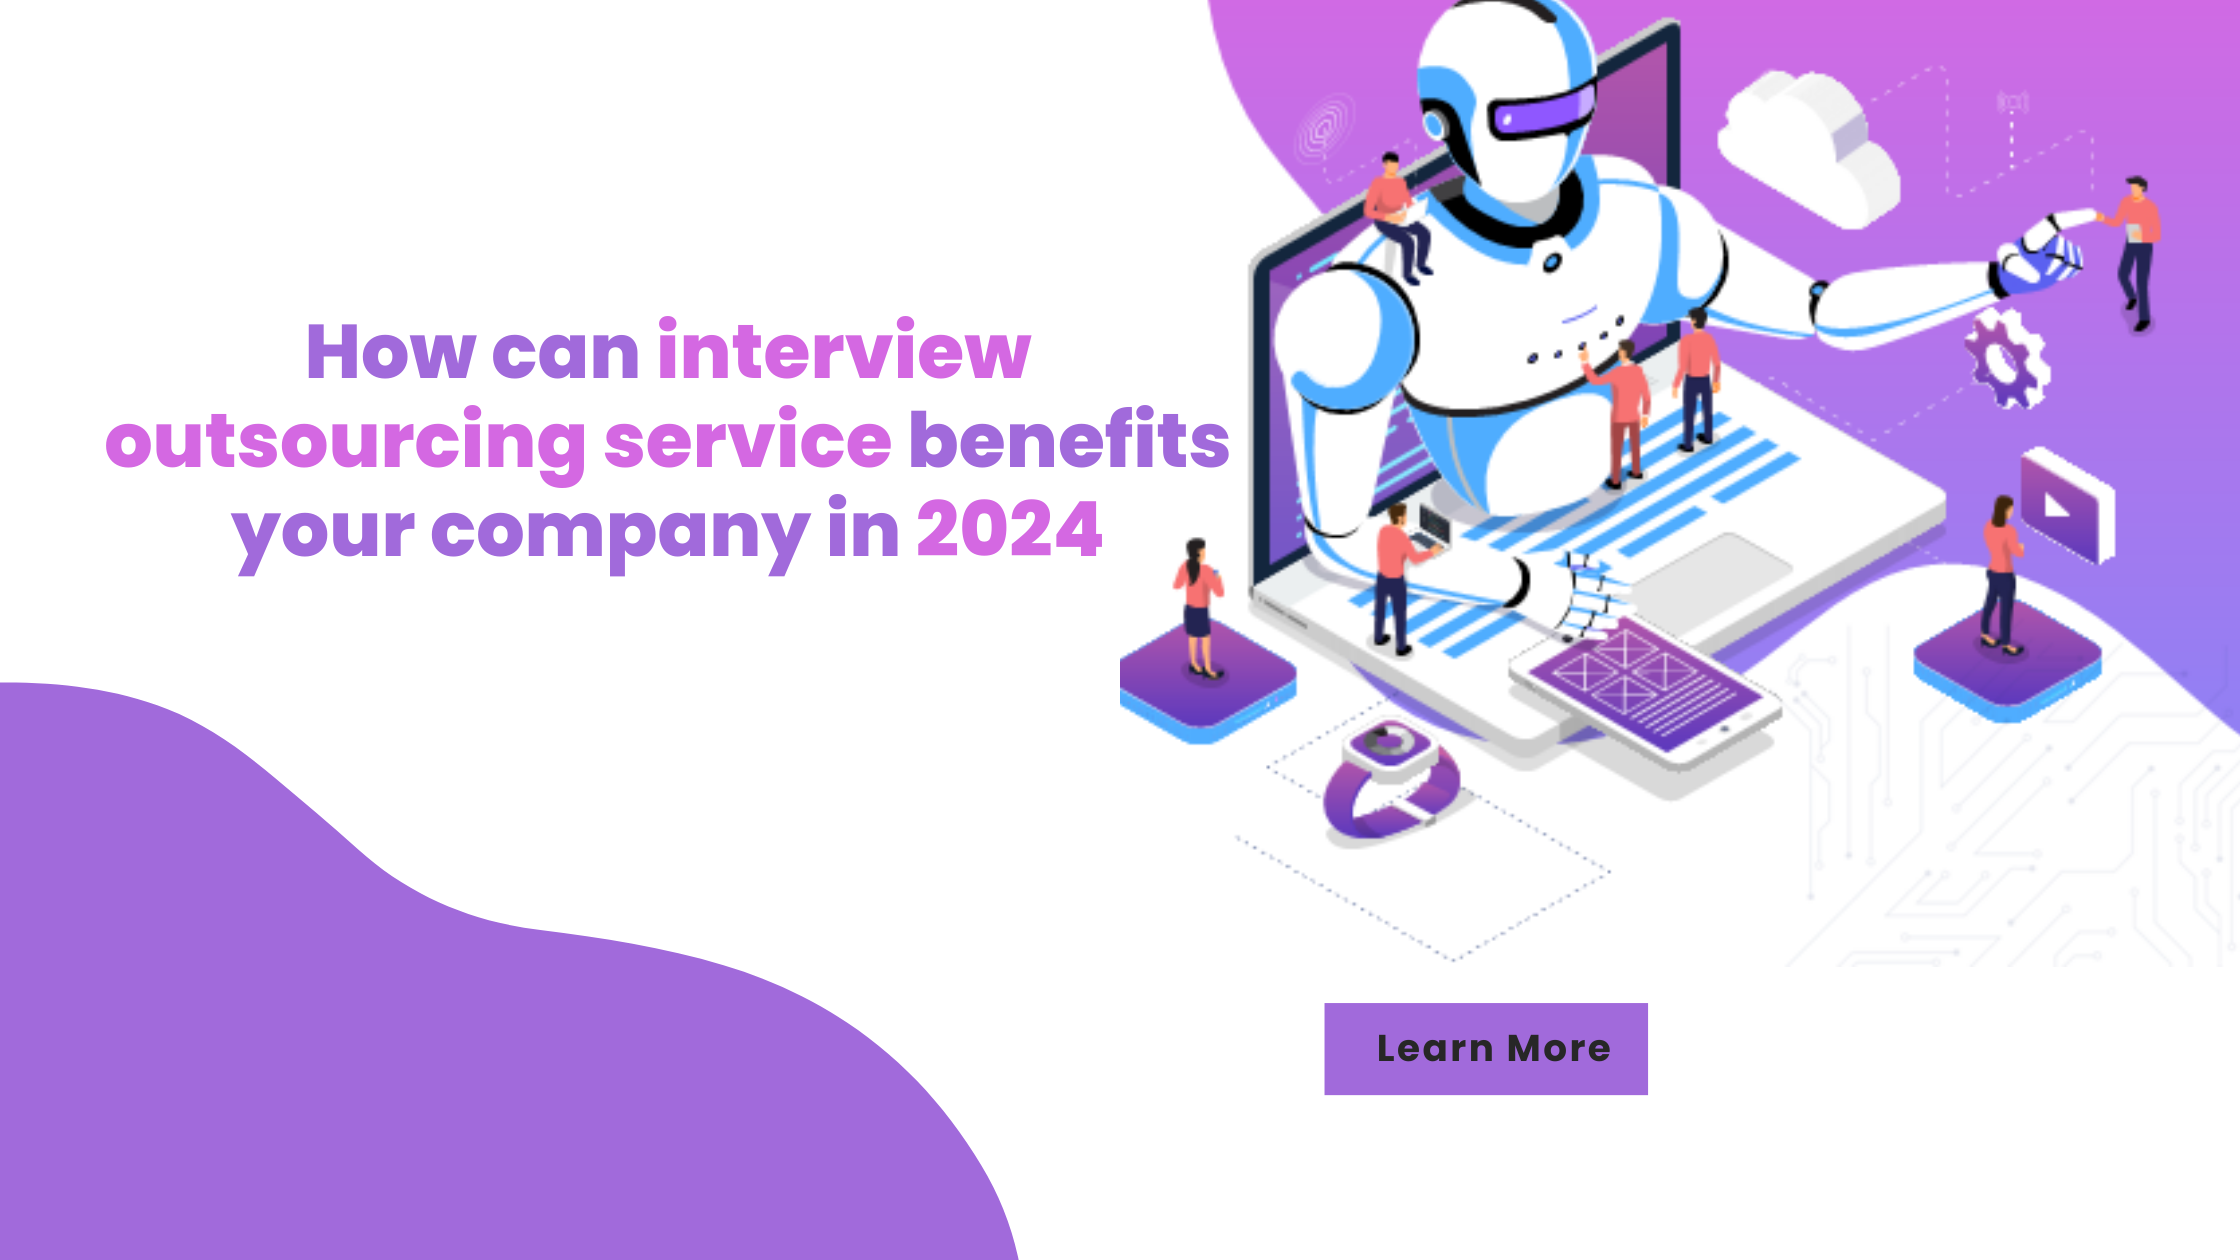 How can interview outsourcing service benefits your company in 2024